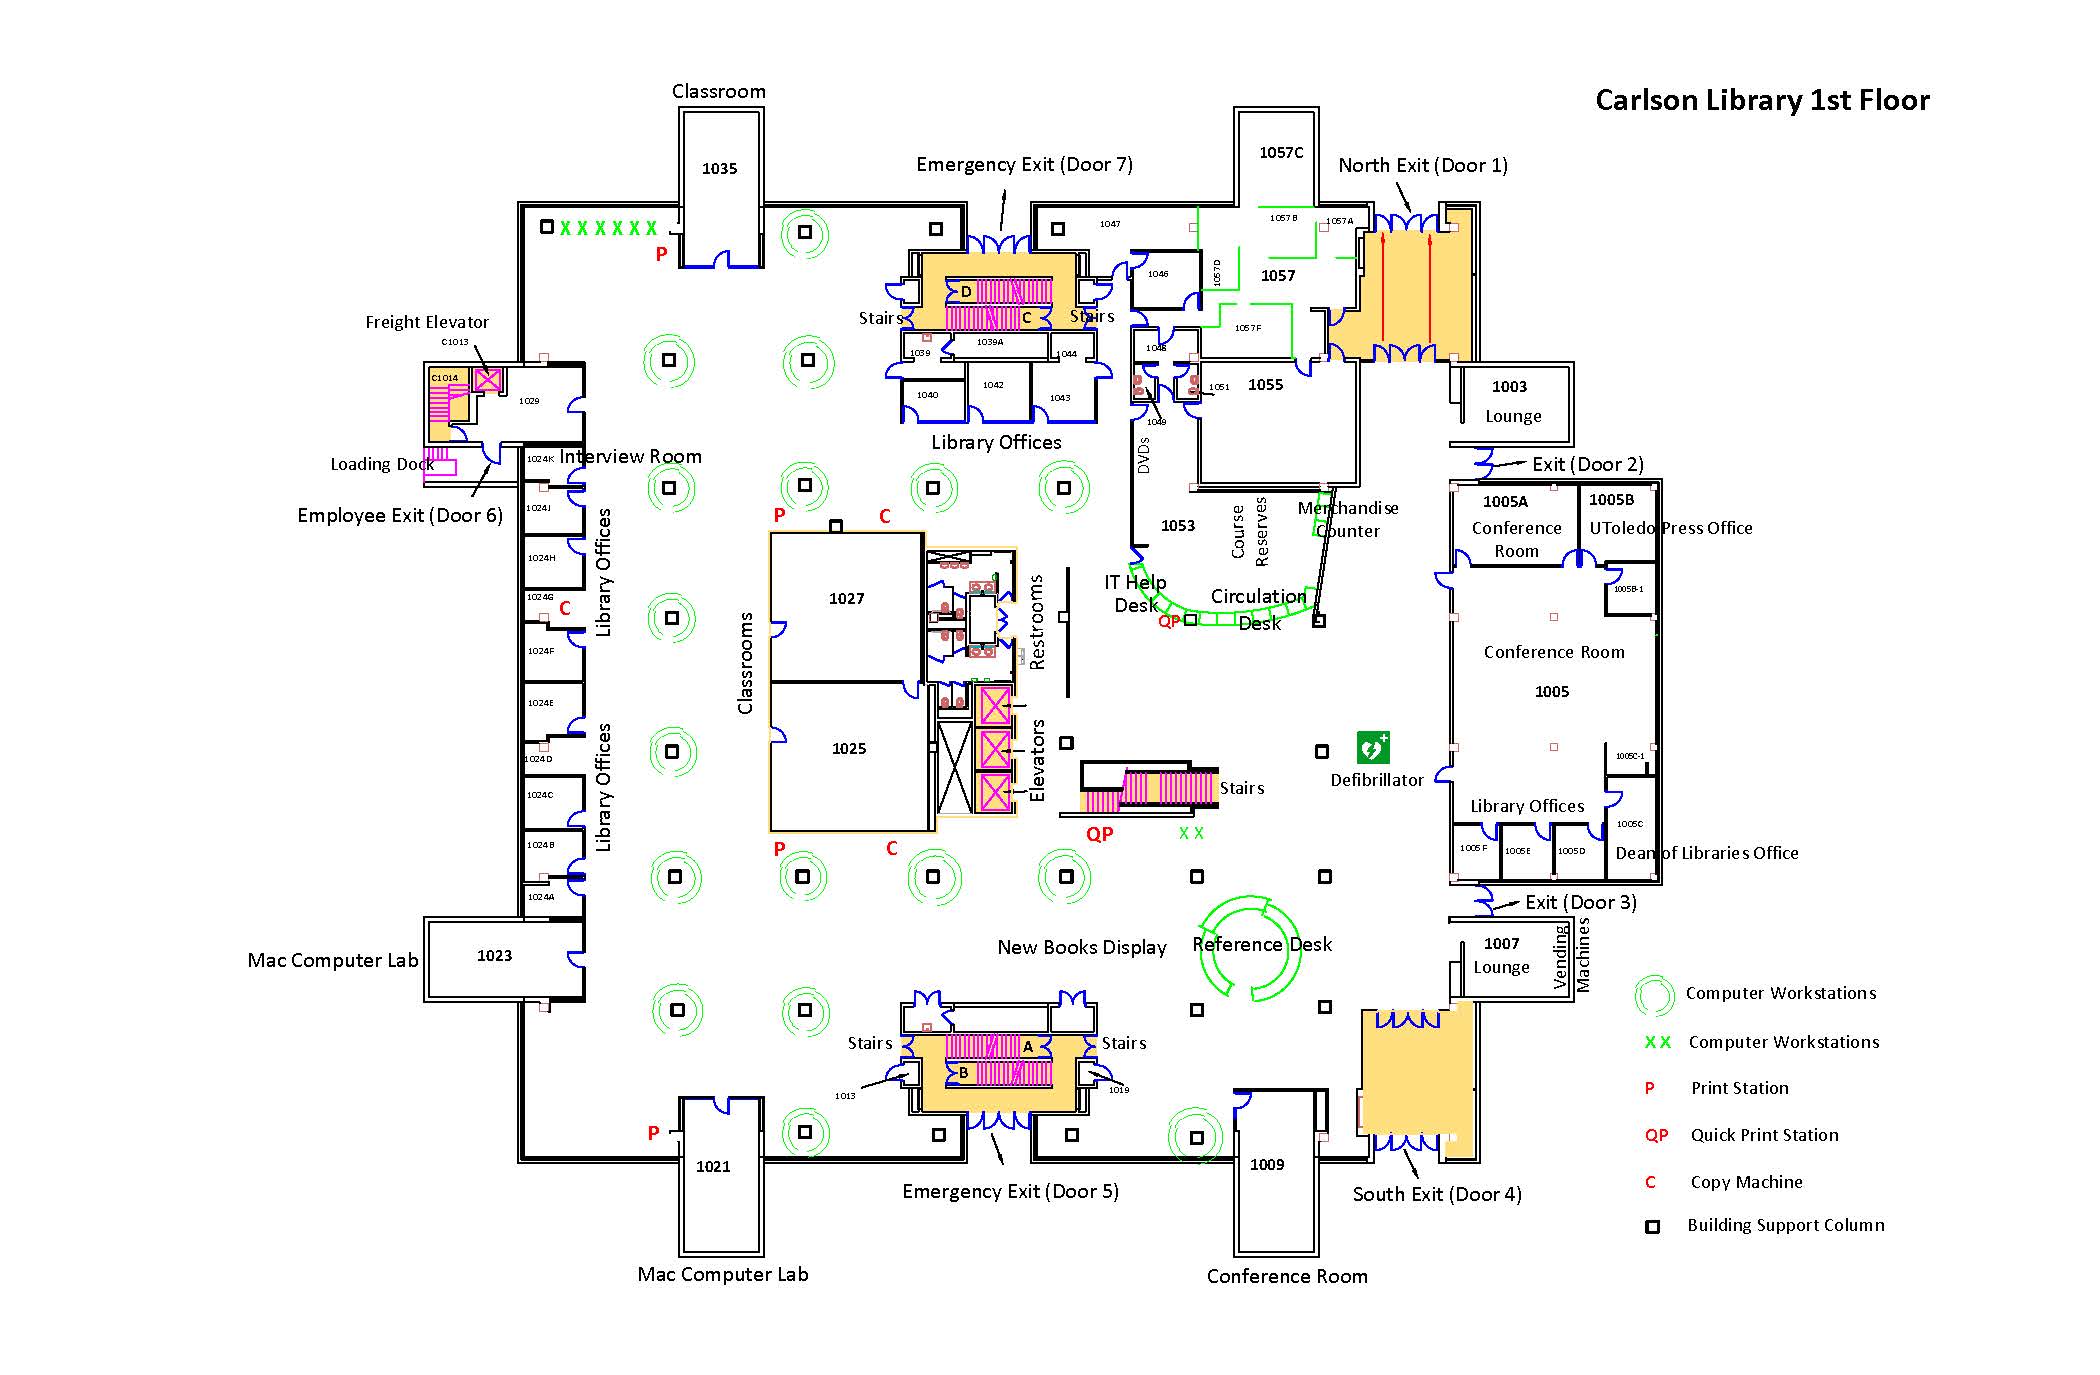 Carlson Library First Floor Map